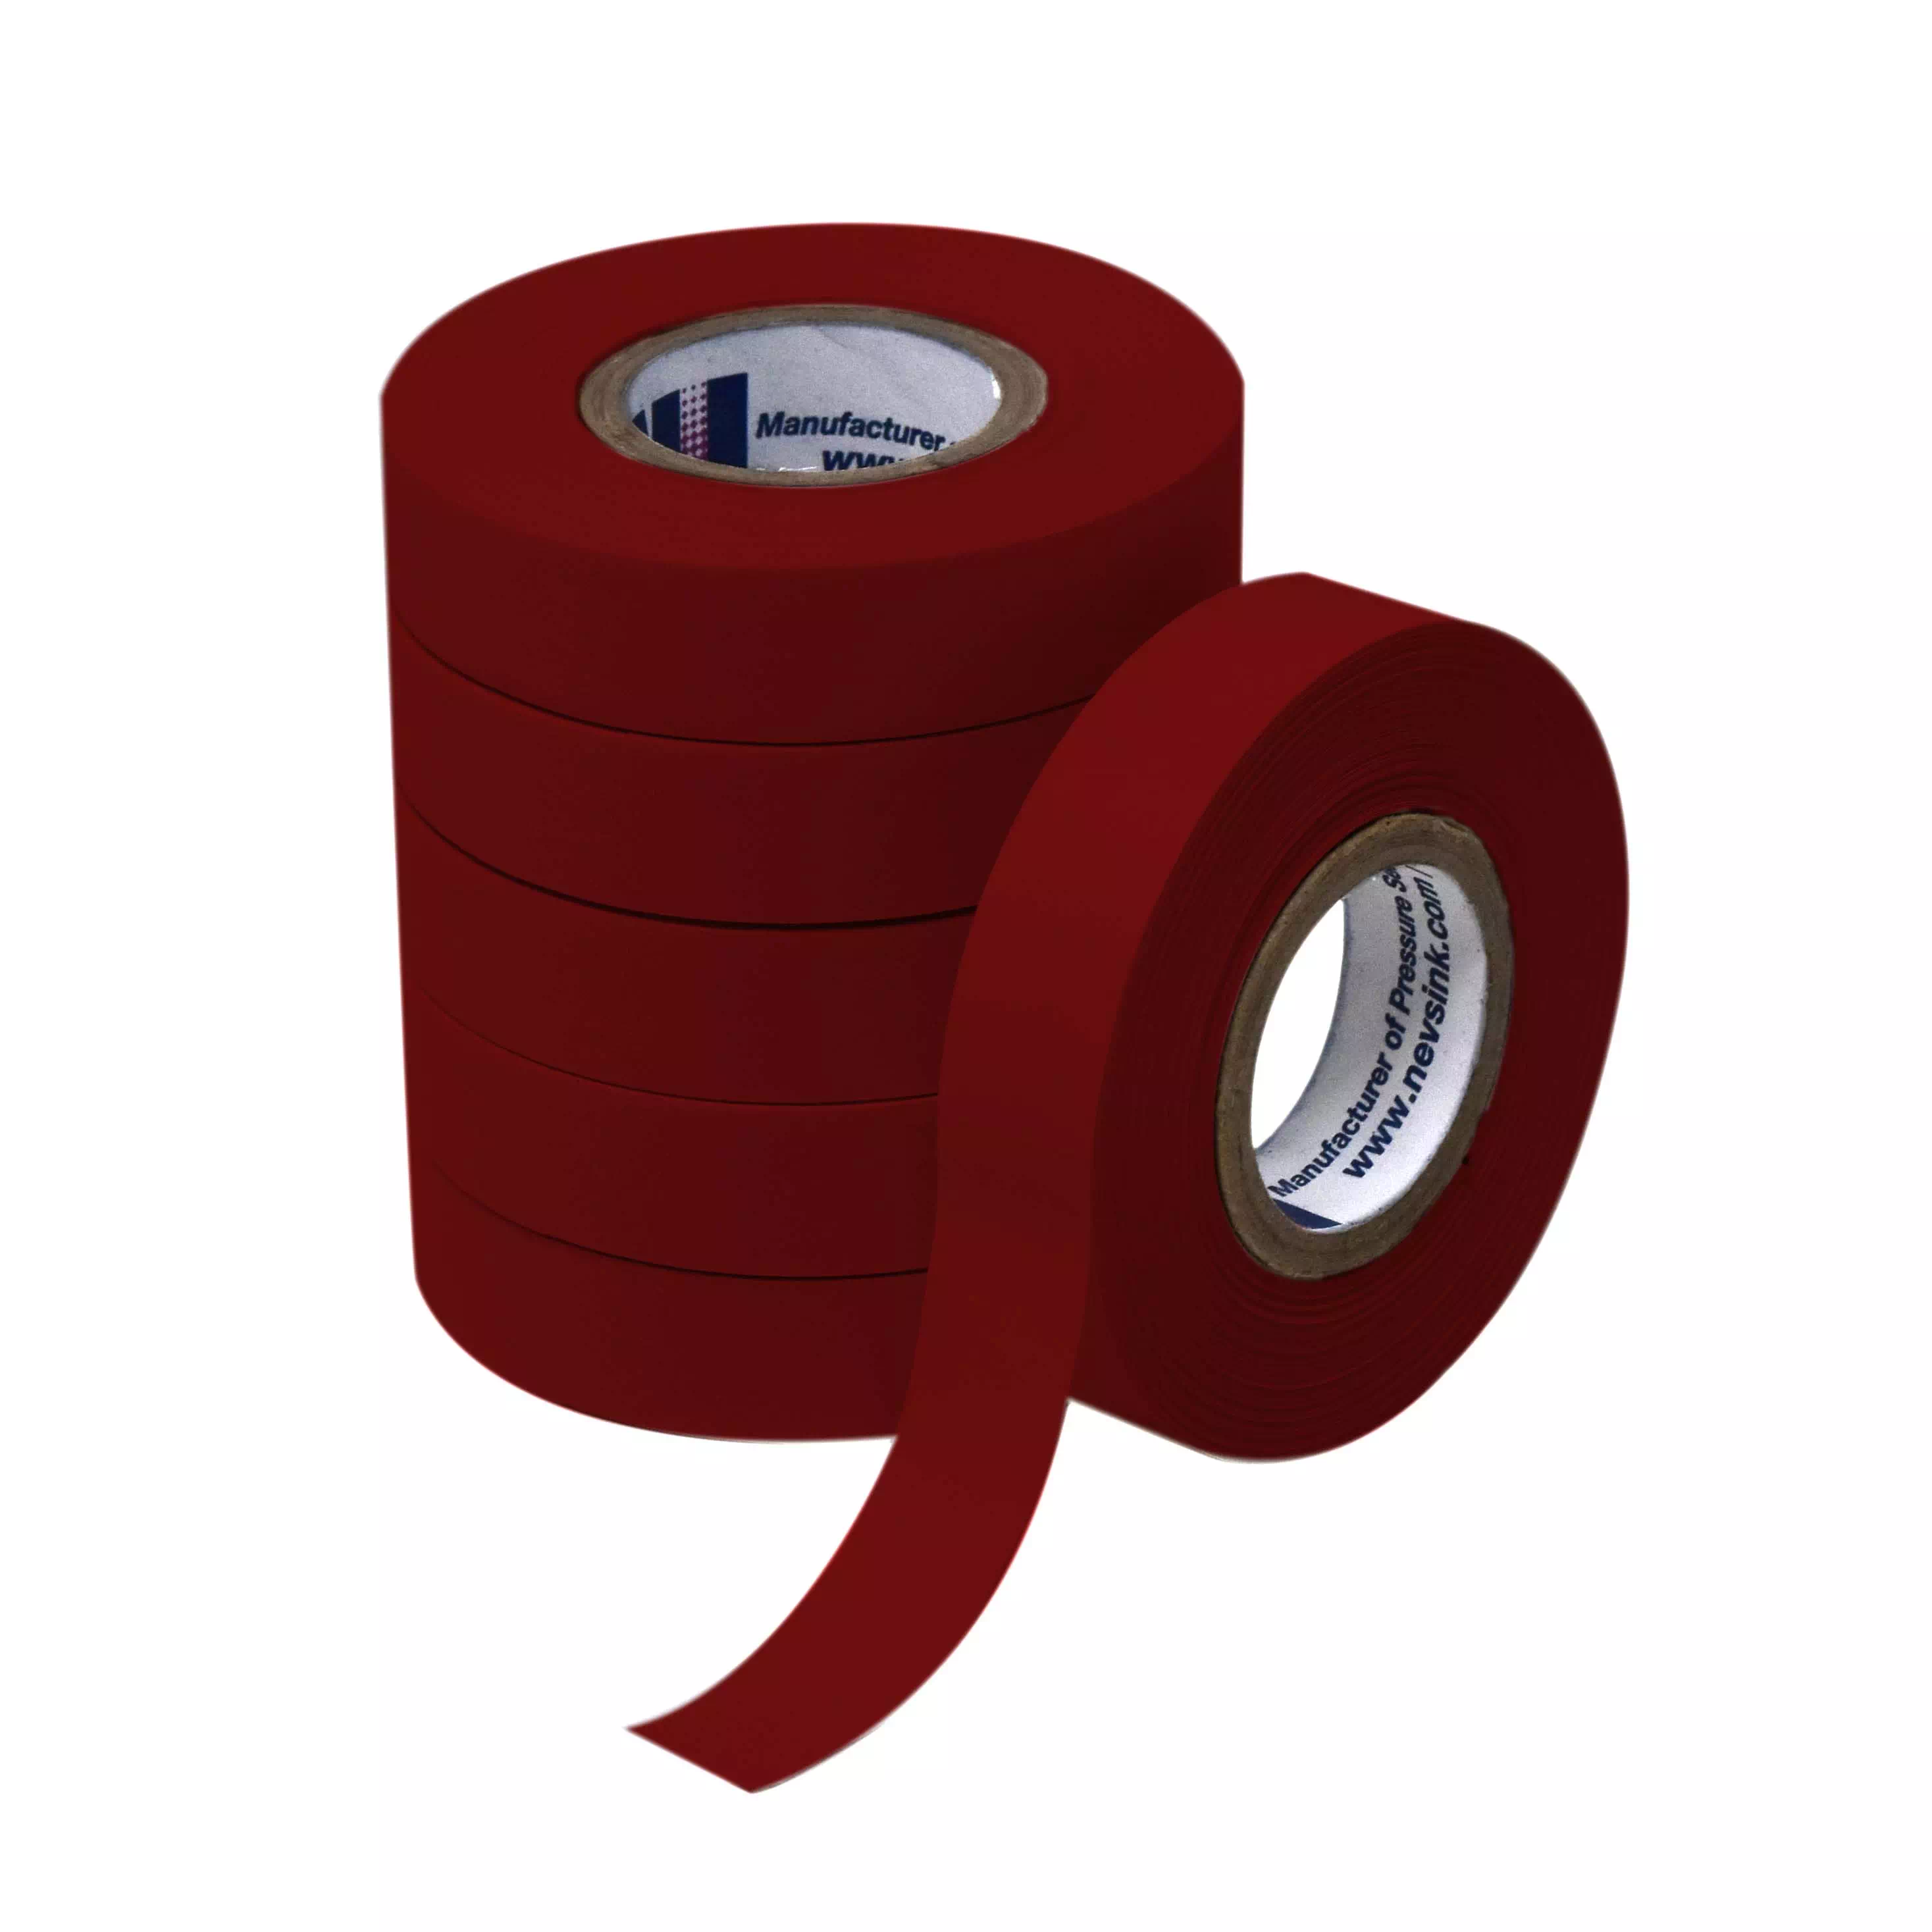 1/2" wide x 500" Dark Red Labeling Tape